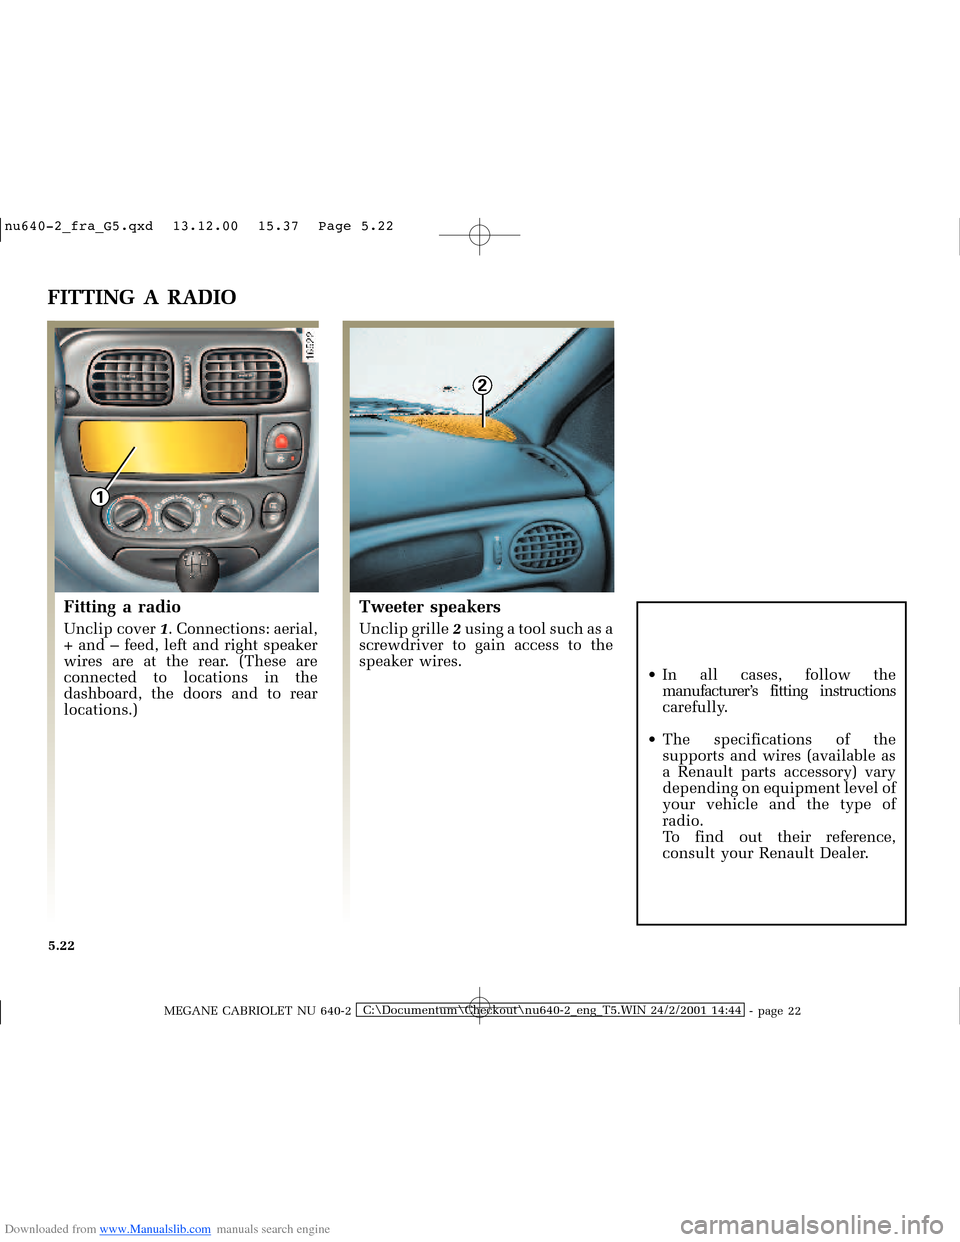 RENAULT MEGANE 2000 X64 / 1.G Owners Manual Downloaded from www.Manualslib.com manuals search engine 1
2
�Q�X������B�I�U�D�B�*���T�[�G� � ��������� � ������ � �3�D�J�H� ����
MEGANE CABRIOLET NU 640-2C:\Documentum\